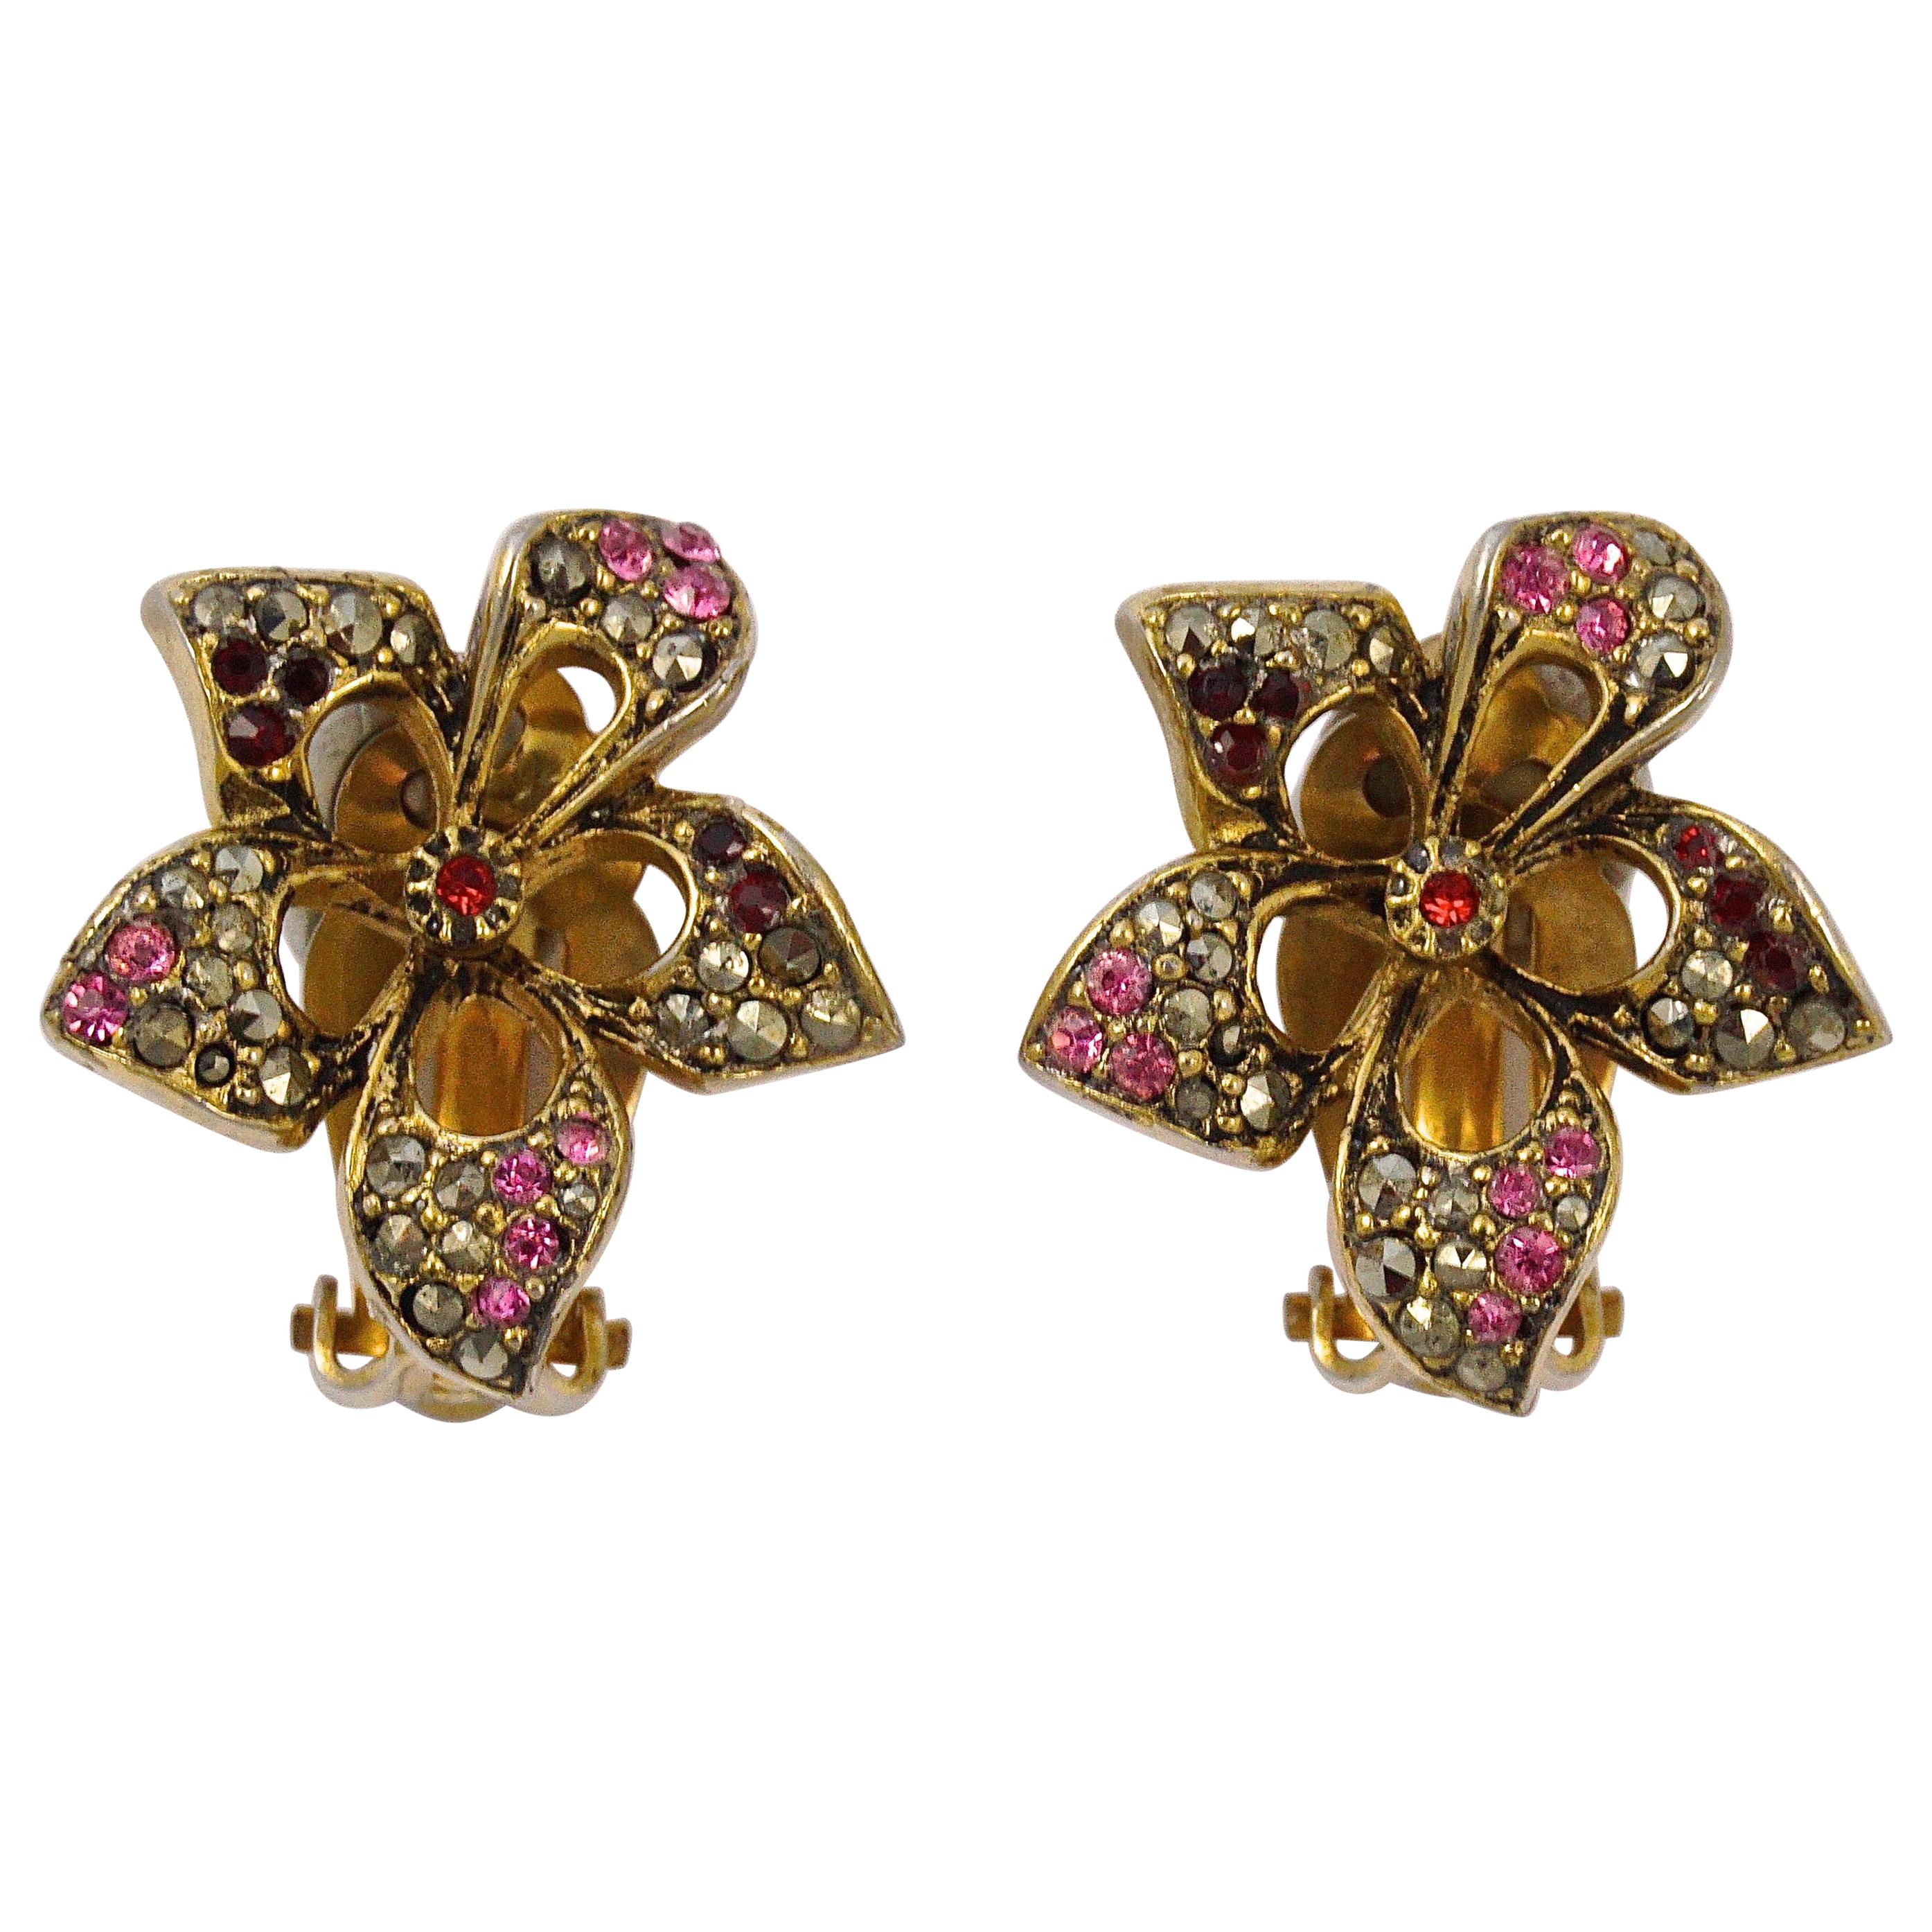 Les Bernard Gold Plated Flower Earrings with Marcasites Red Pink Rhinestones For Sale